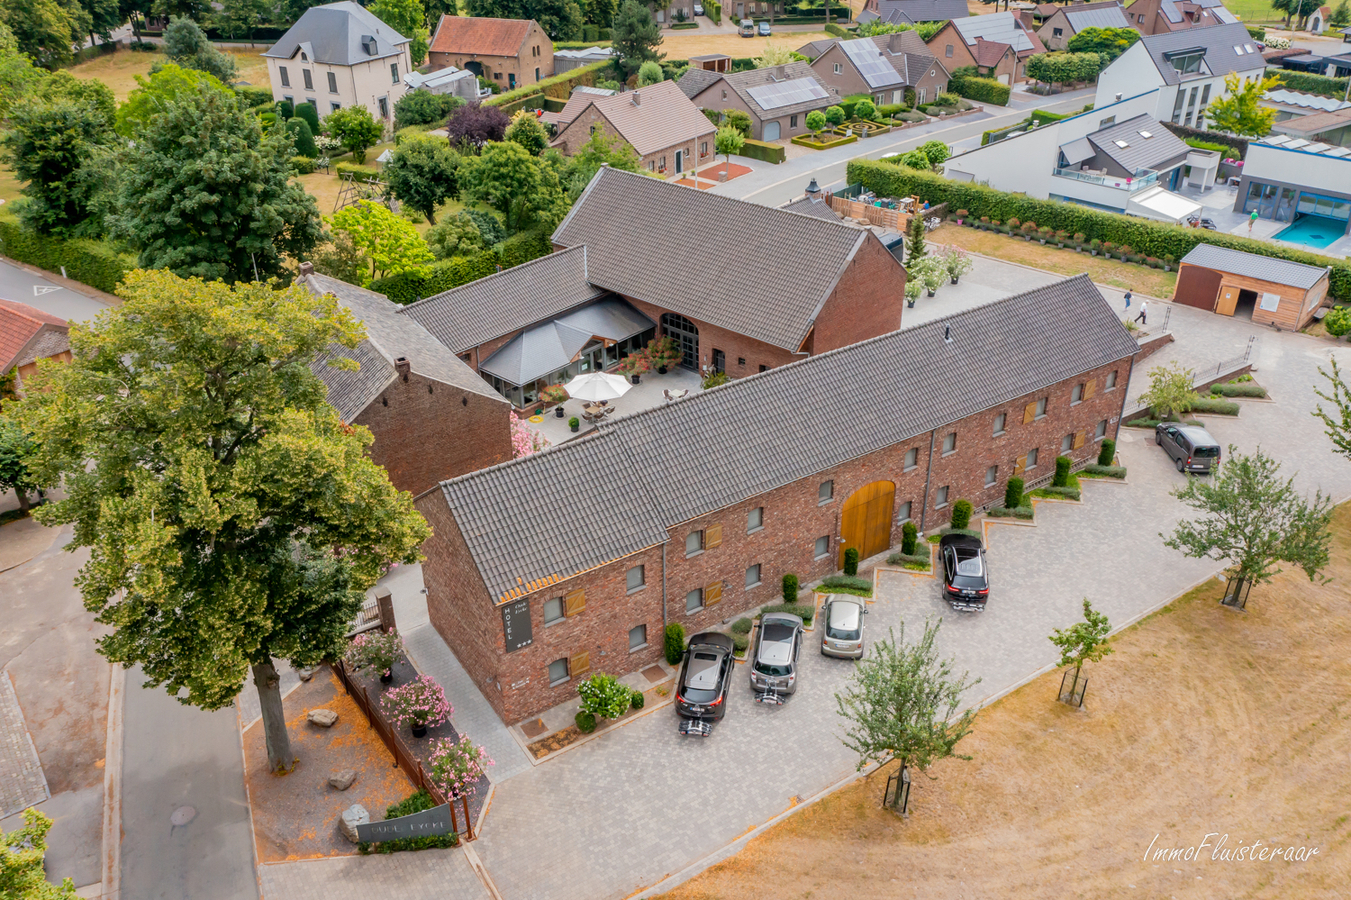 Unique property including a hotel and residential house on approximately 42 acres in Aldeneik (Maaseik). 